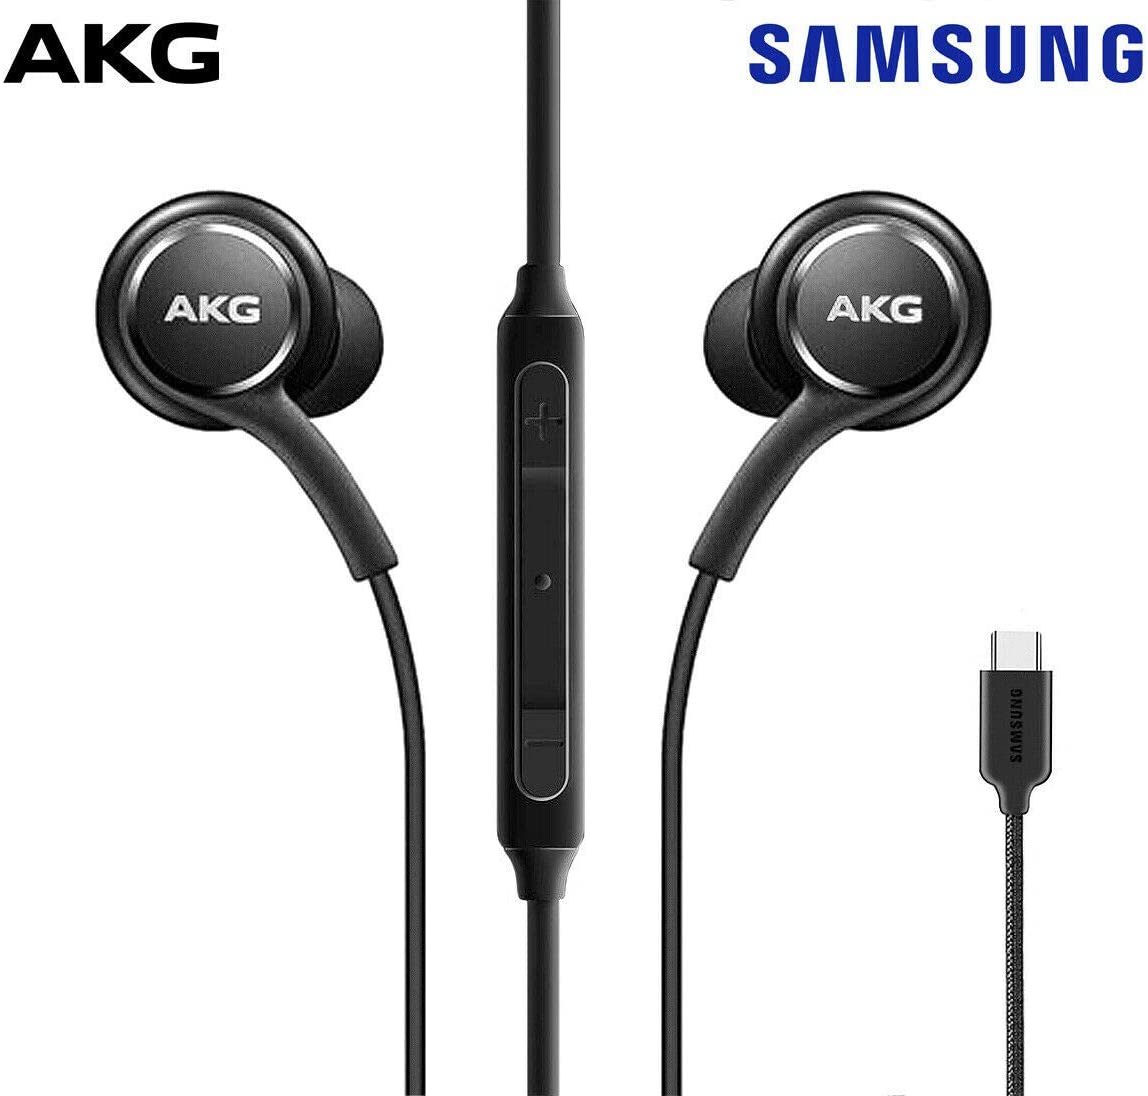 AKG TYPE-C Earphones for Galaxy Tab S7 (2020) Tablets - Headphones USB-C Earbuds w Mic Headset Black for Samsung Galaxy Tab S7 (2020) - image 3 of 3